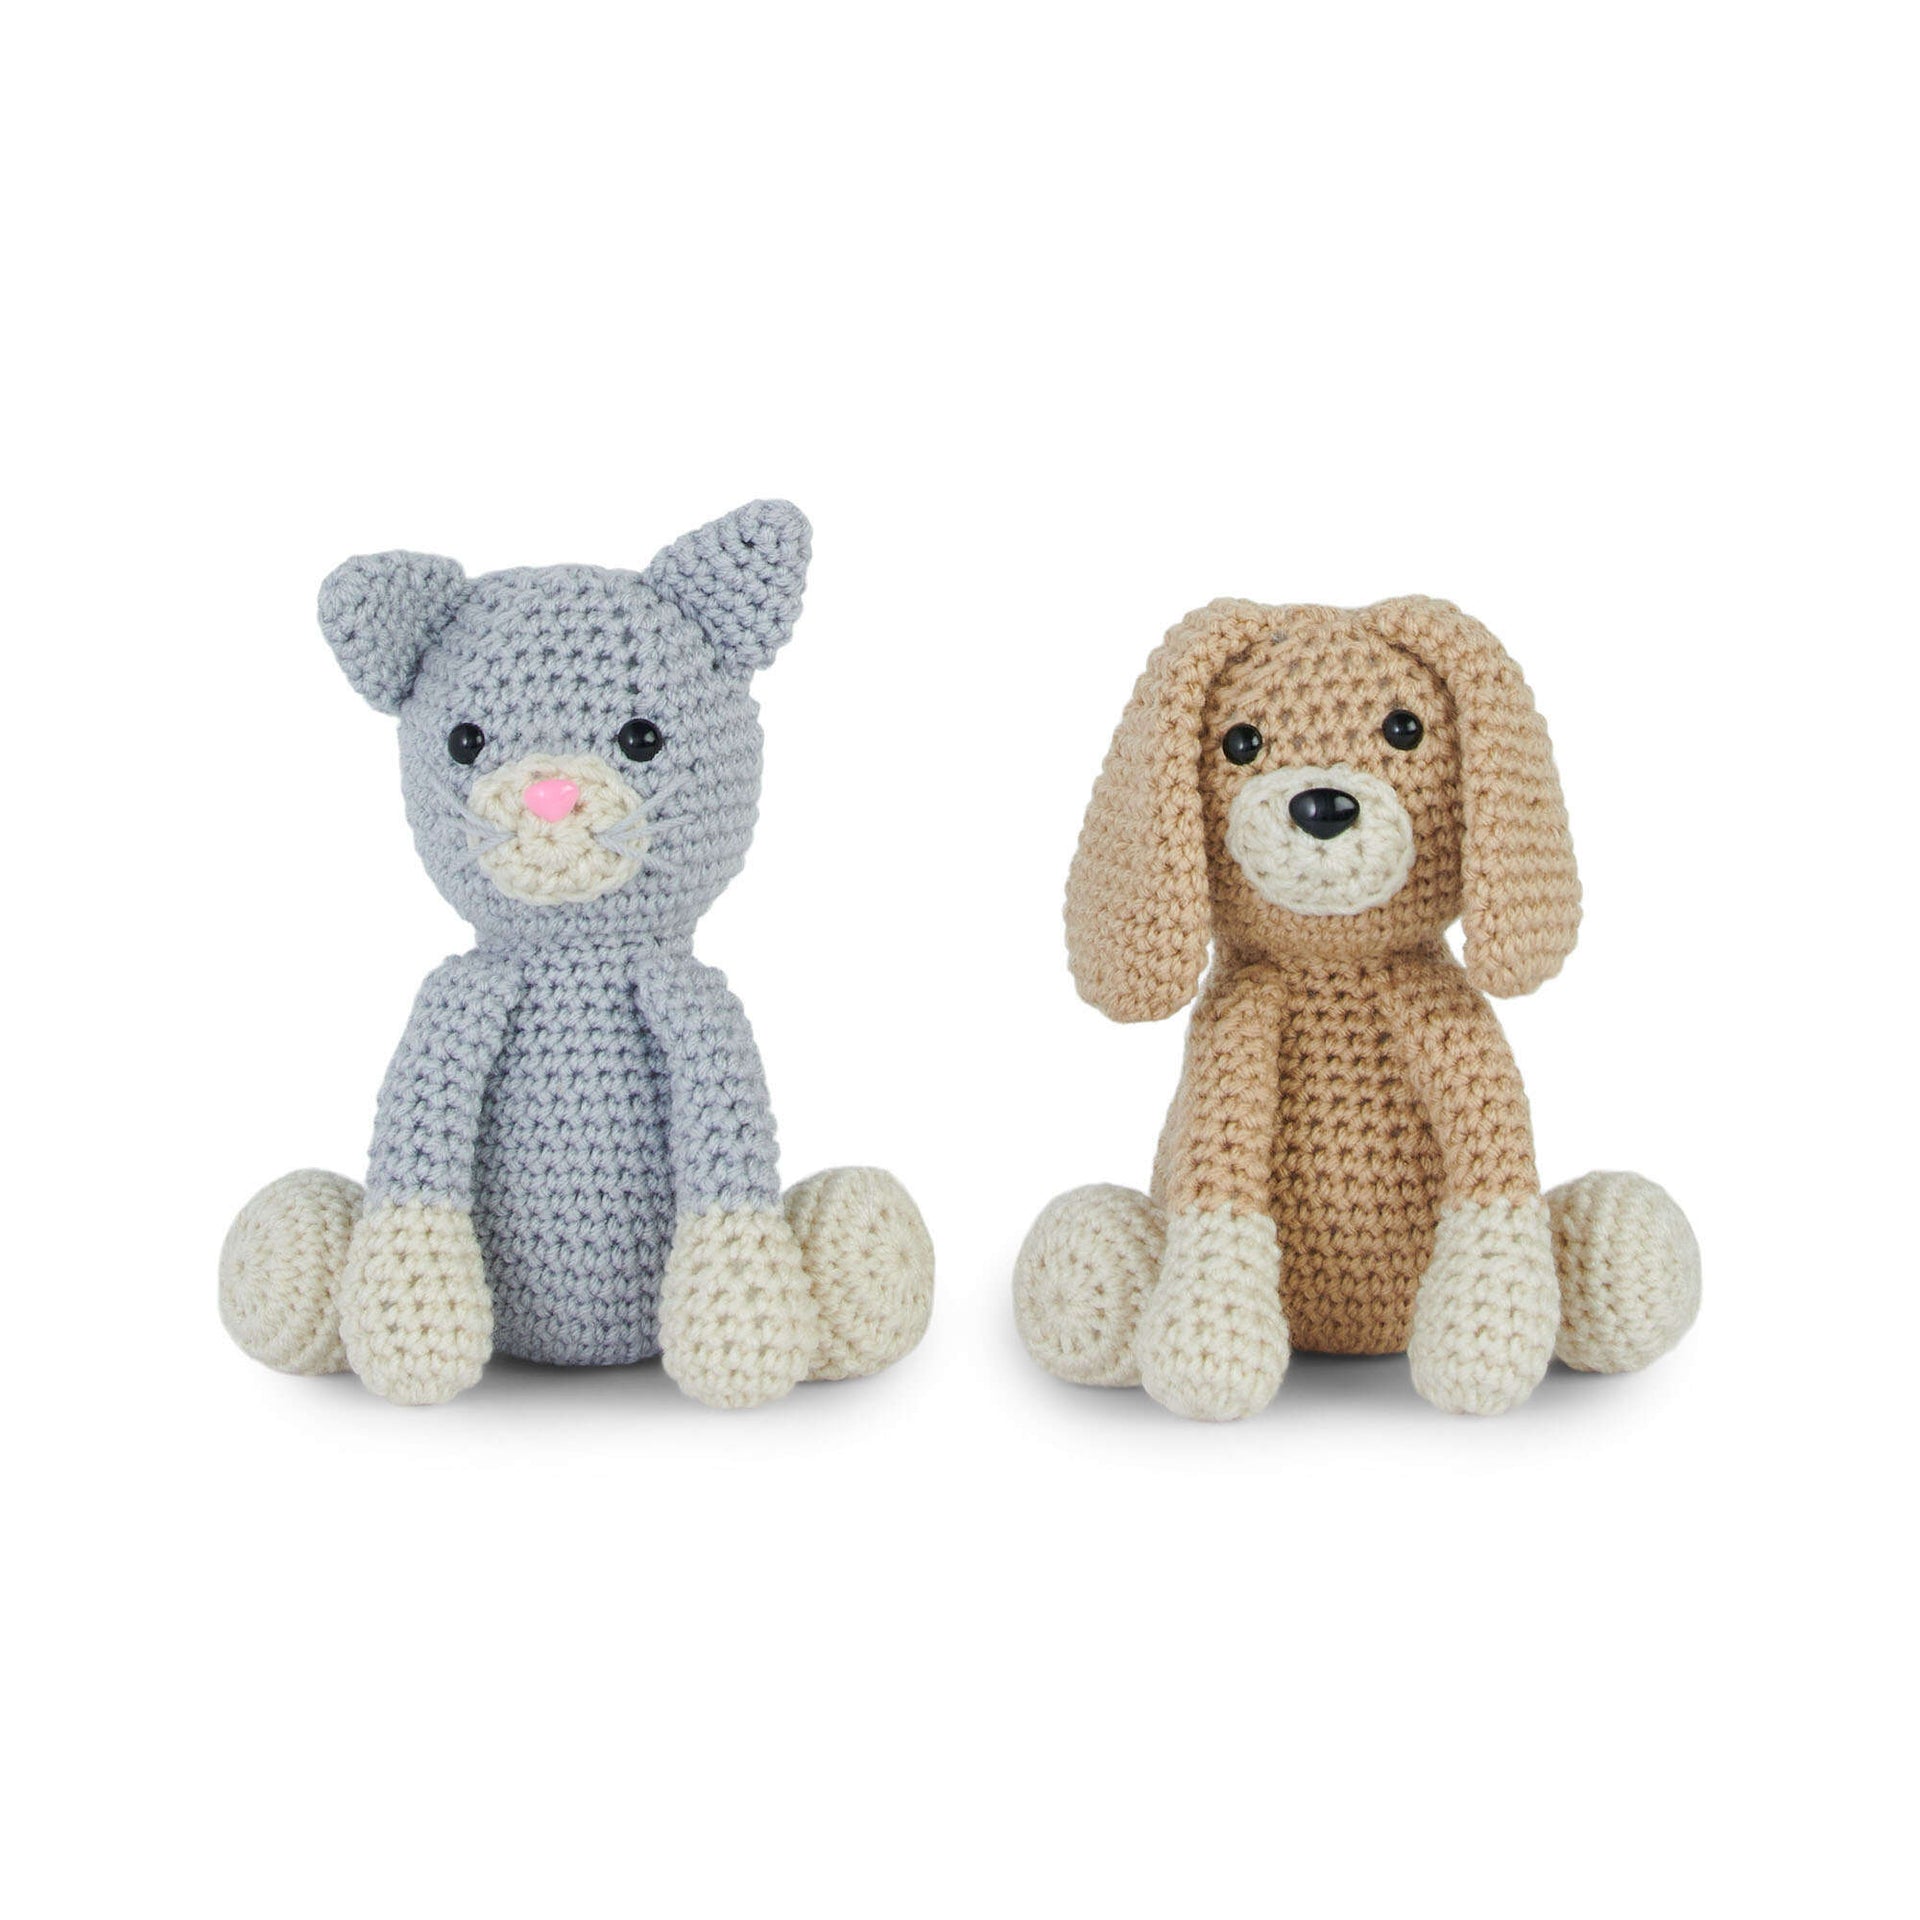 Crochet Cat and Dog Toy Duo Crochet Along - Repeat Crafter Me